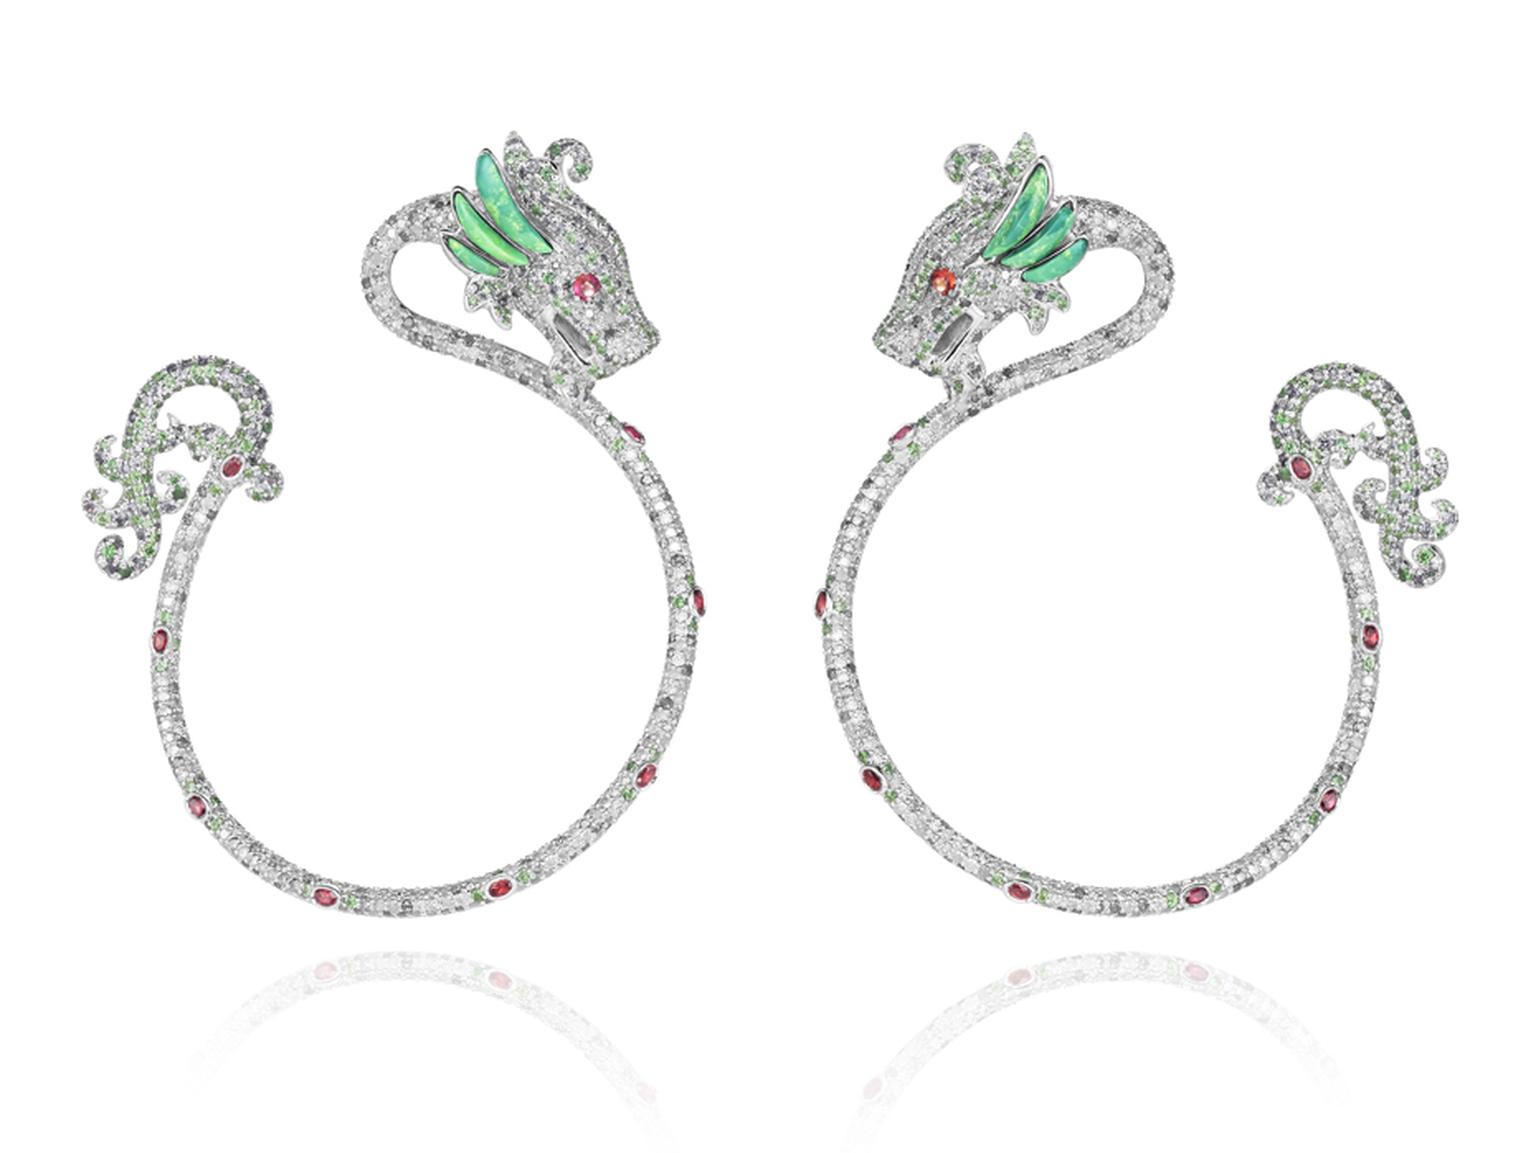 Harumi for Chopard Dragon earrings with rubies, diamonds, emeralds and turquoise